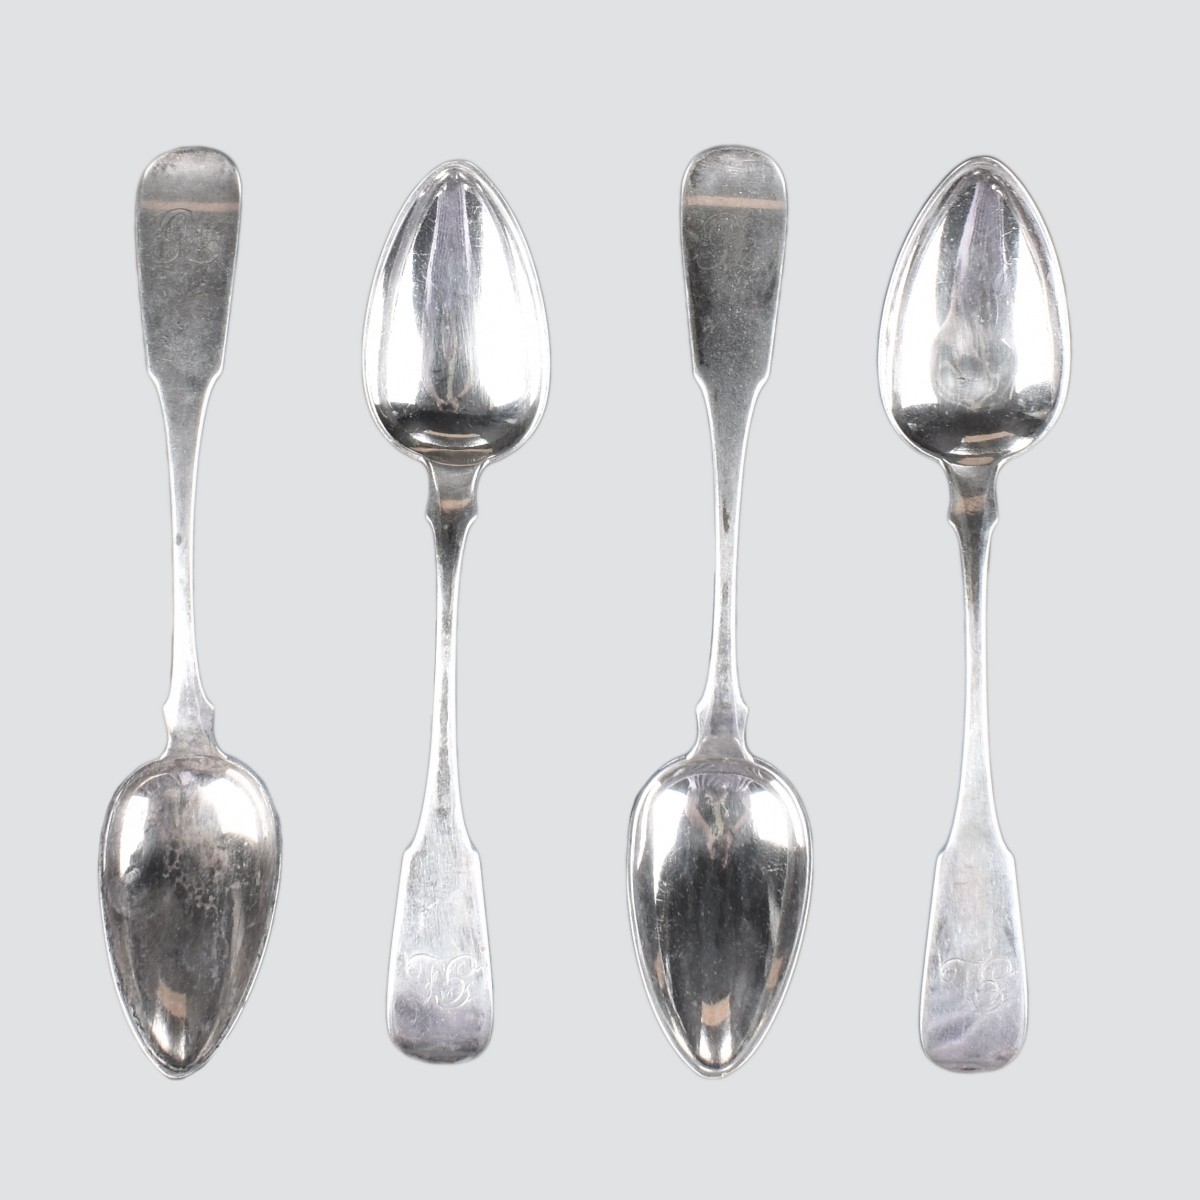 Four 19C Coin Silver Spoons